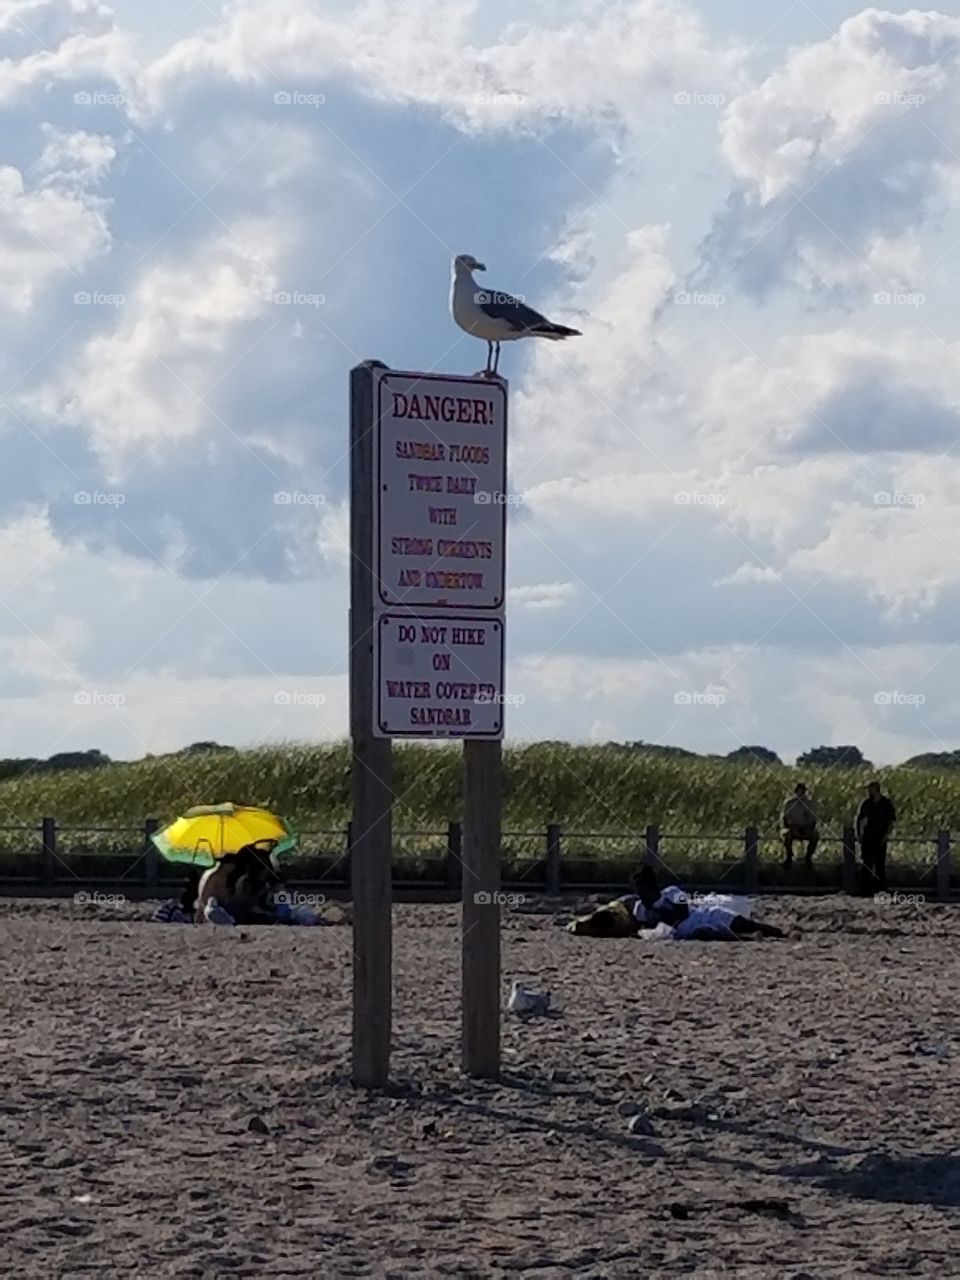 Seagull on a danger sign